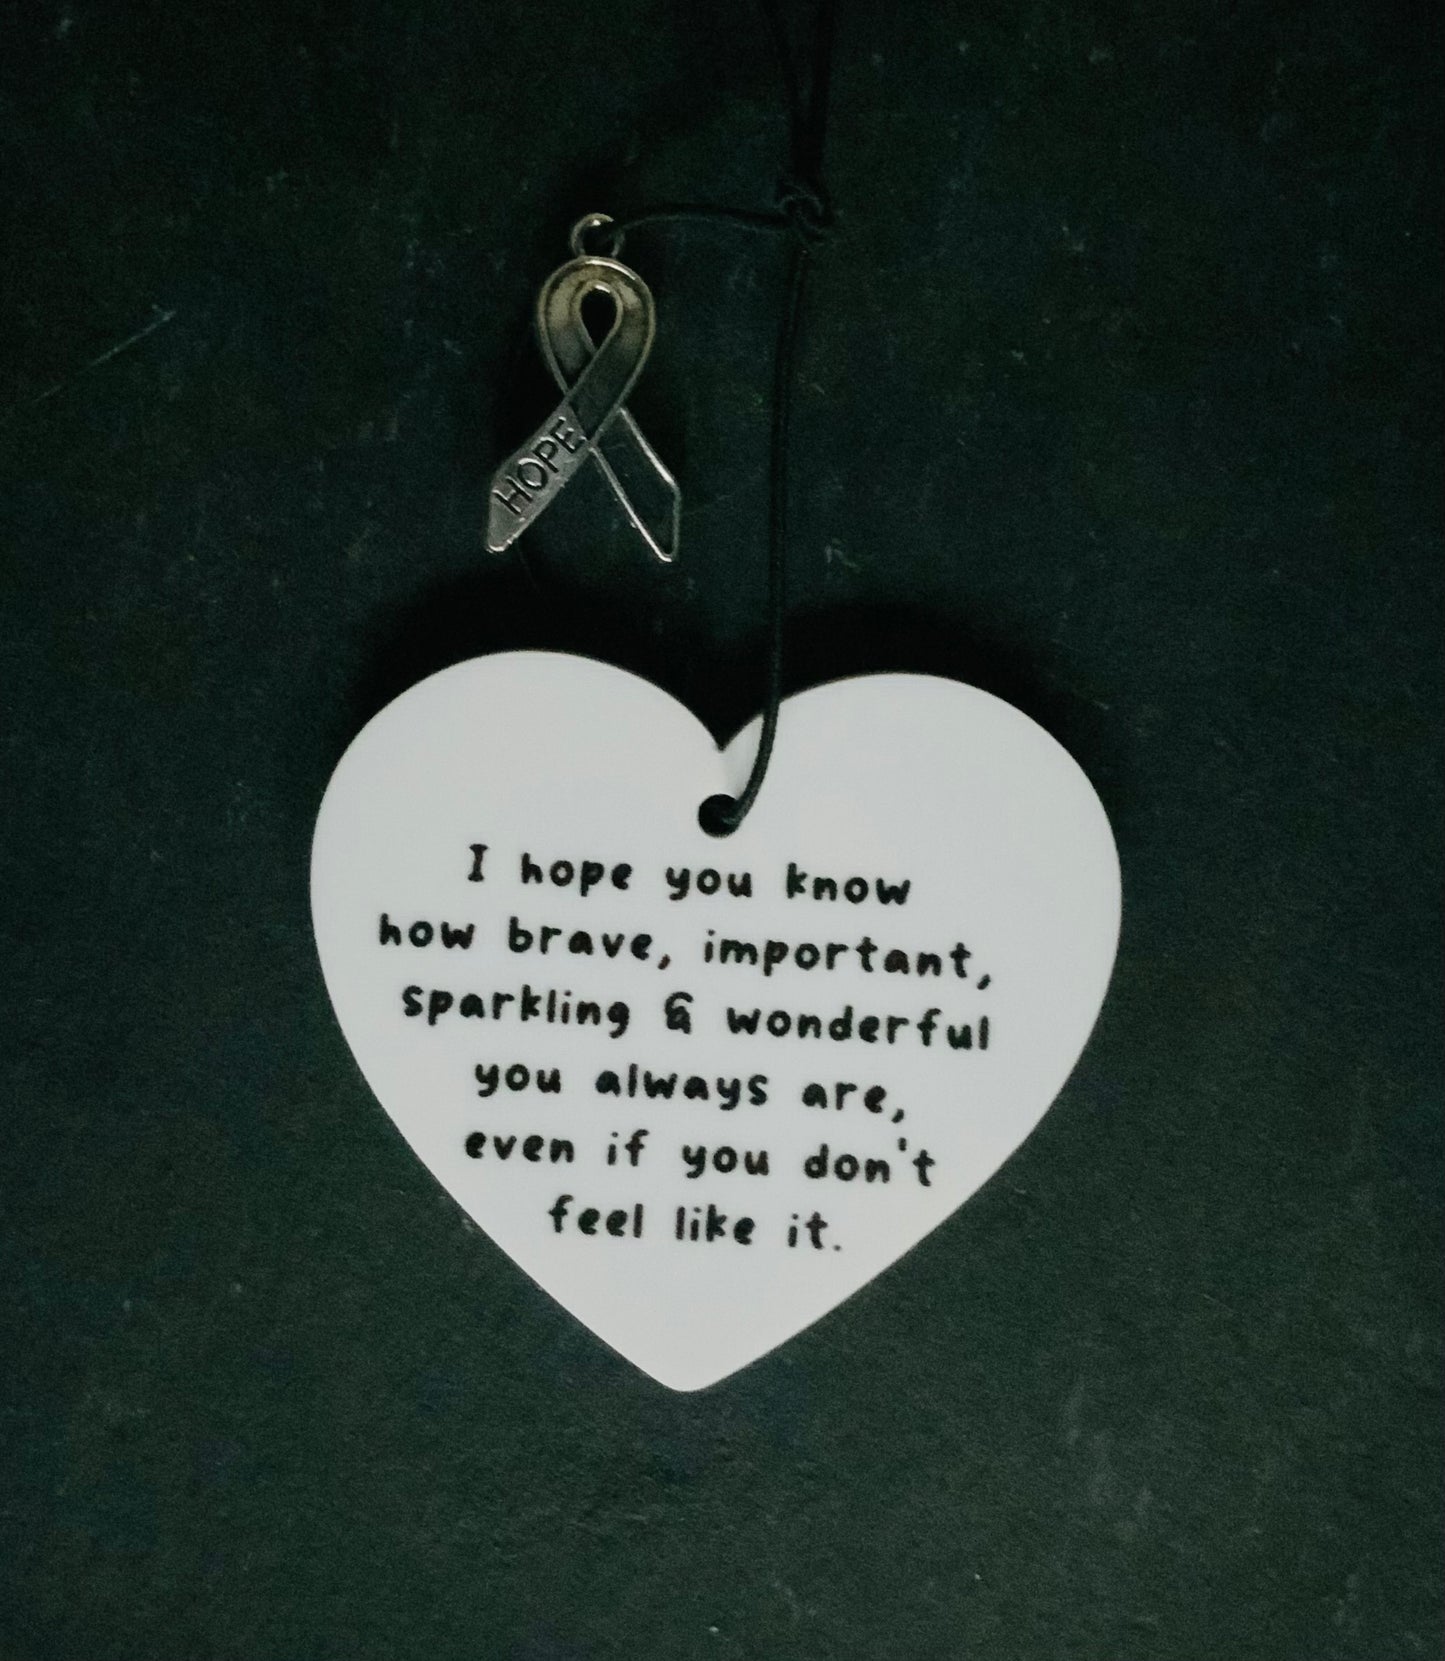 Decorative hanging heart with motivational message and ribbon of hope charm 🖤